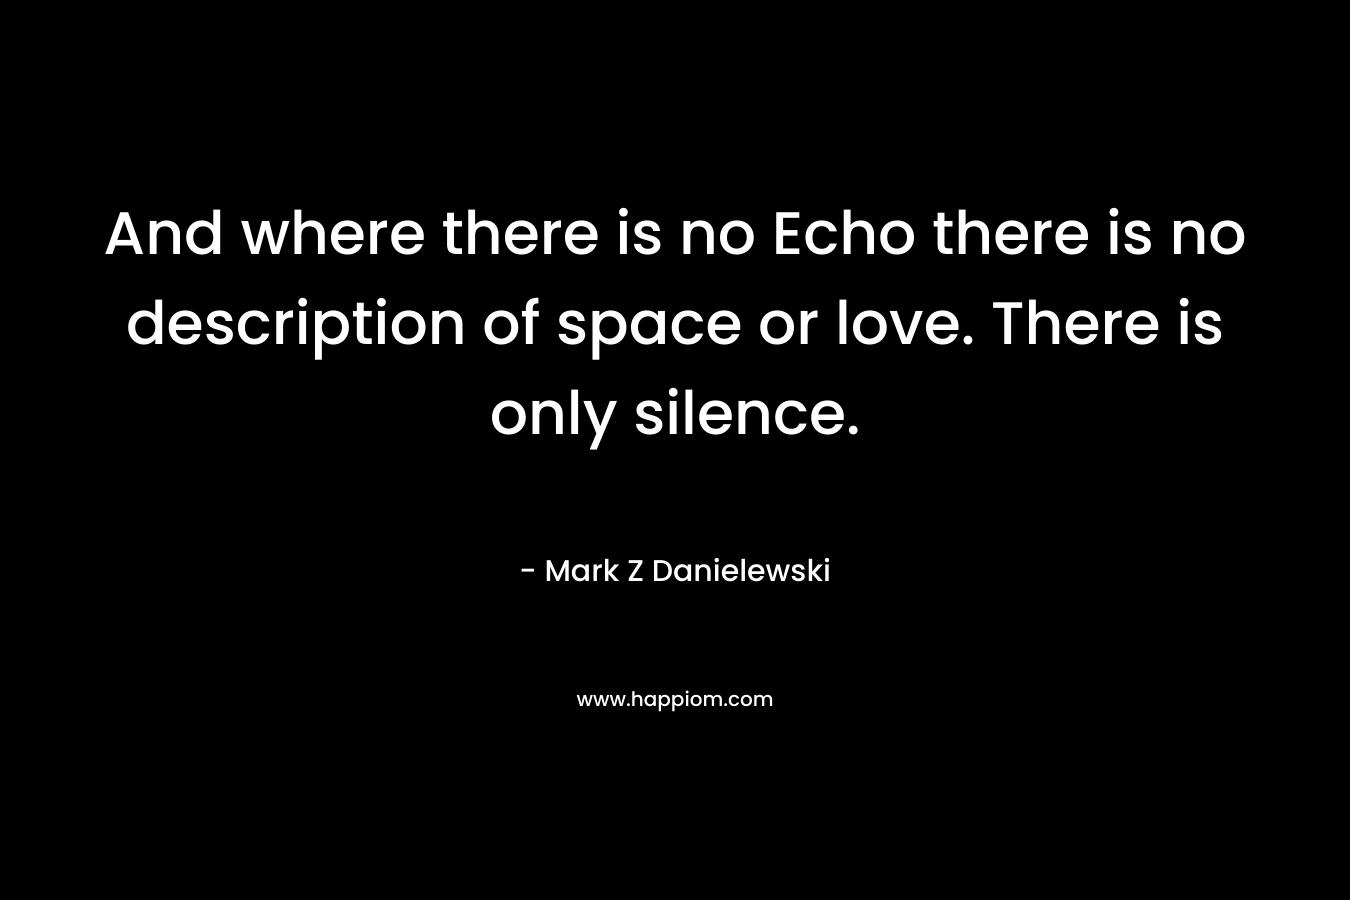 And where there is no Echo there is no description of space or love. There is only silence. – Mark Z Danielewski